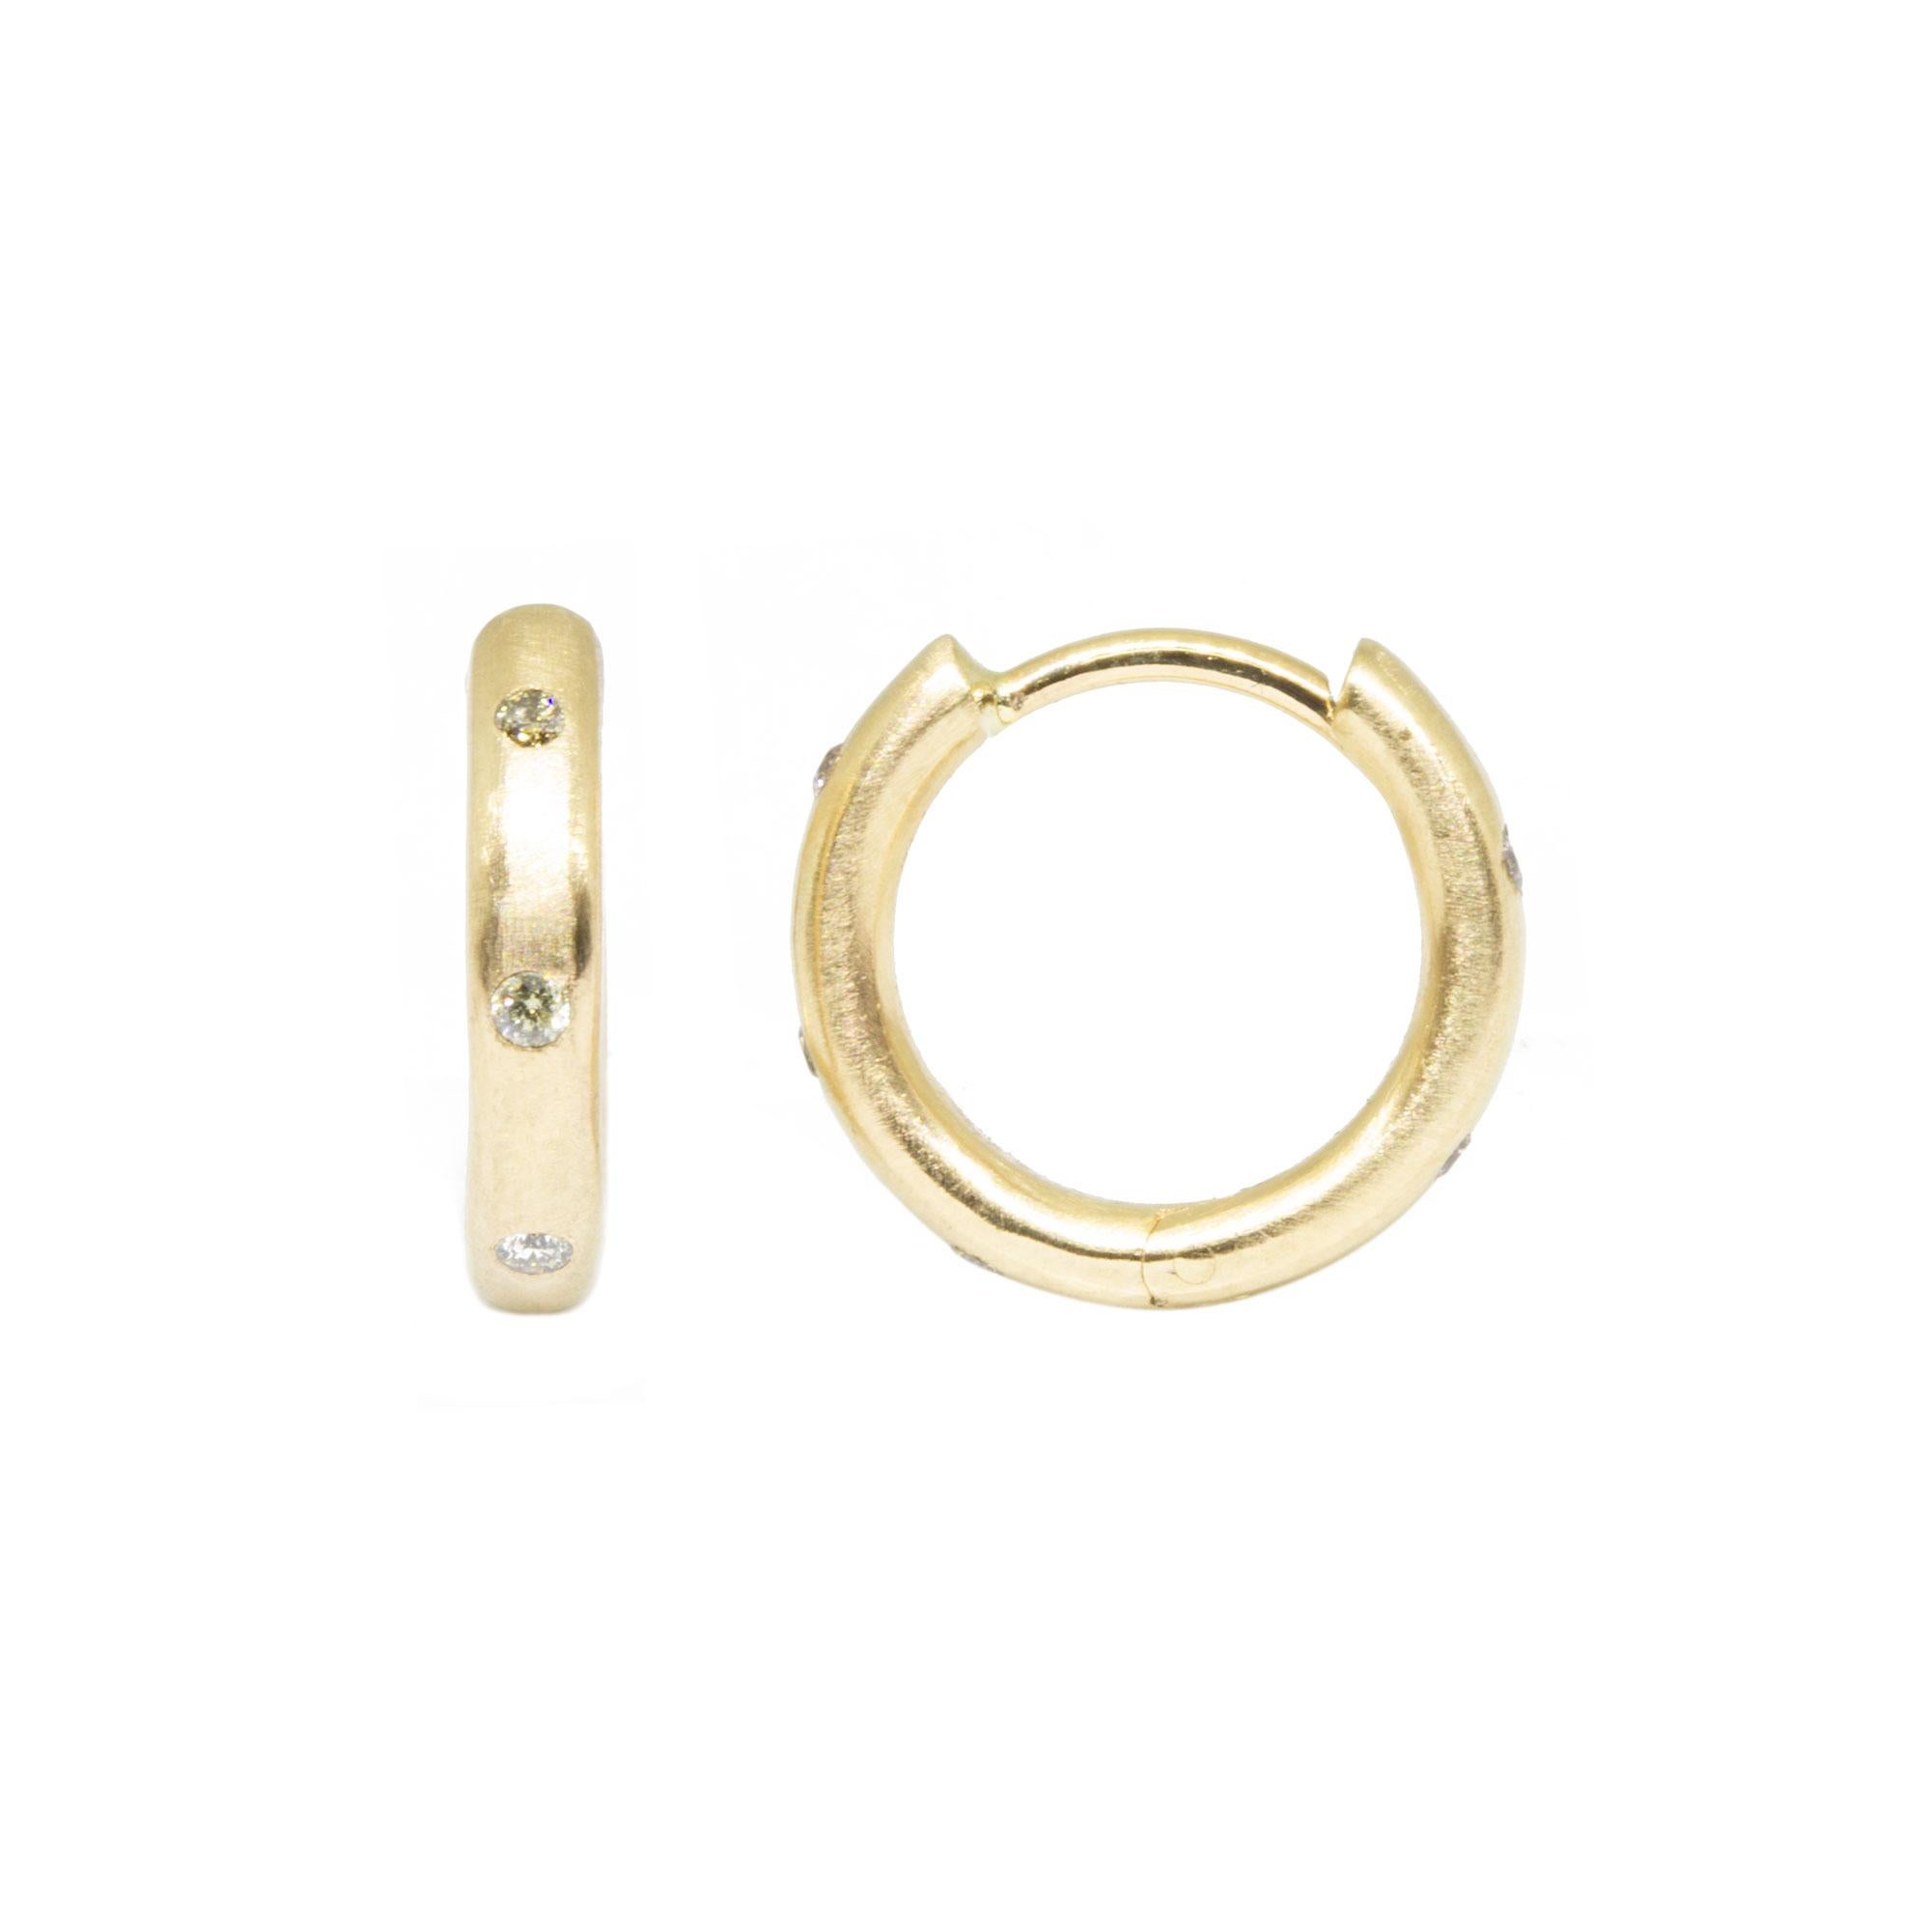 Detailed with sparkling diamonds, the Gold Hoops are made for dangling your favorite Charms (or a few). Or wear them on their own for an effortless, understated look.


Details
Metal: 14K Gold, 18K Gold
Diamond carat: 0.2
Size: 13mm
Diamond size: